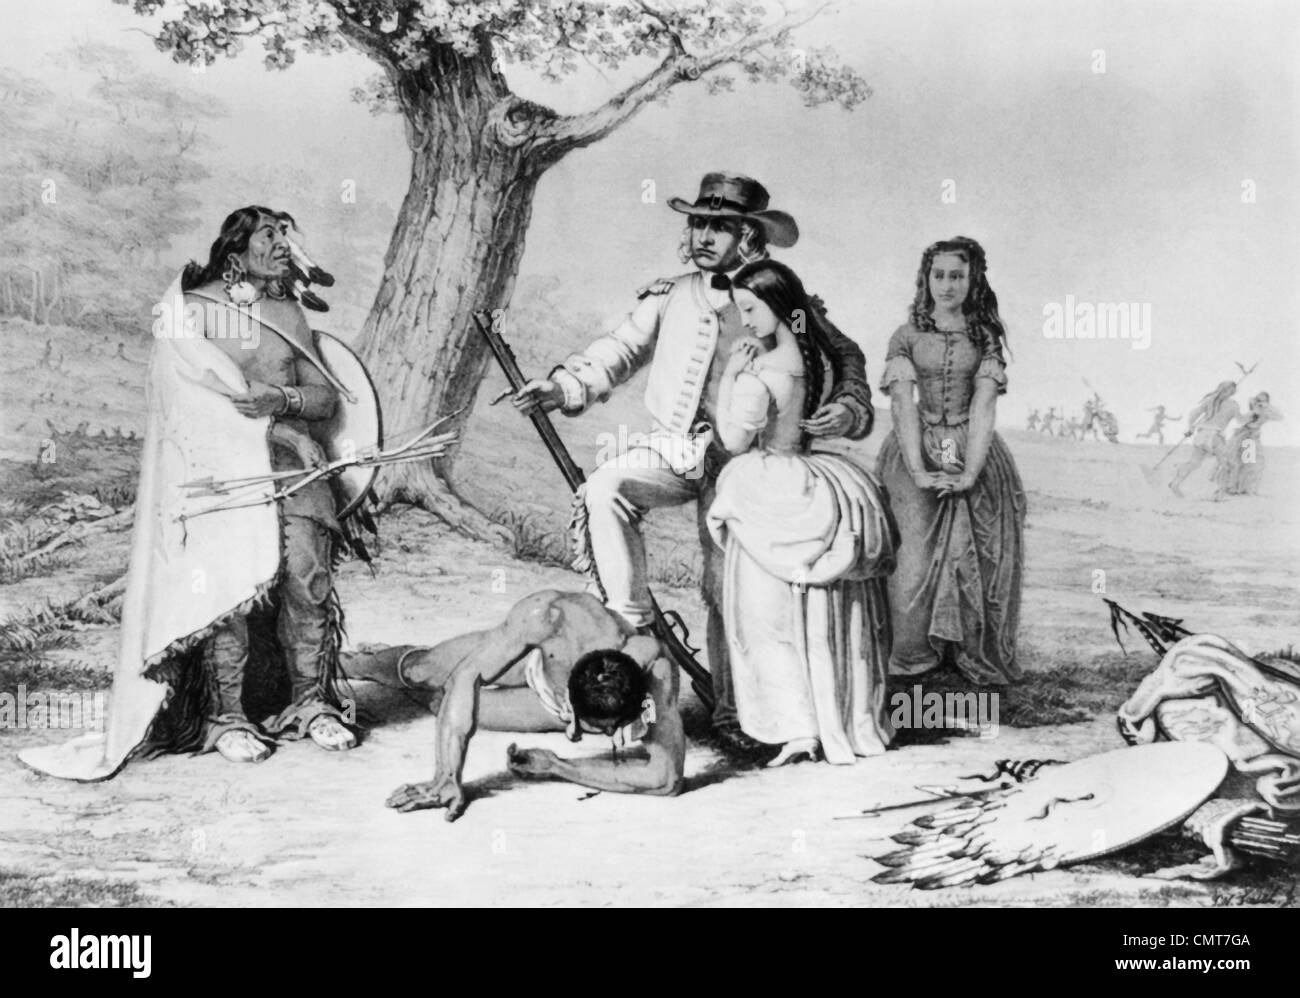 Vintage print depicting American frontiersman Daniel Boone (1734 - 1820) rescuing his daughter Jemima from Indians in 1776. Stock Photo